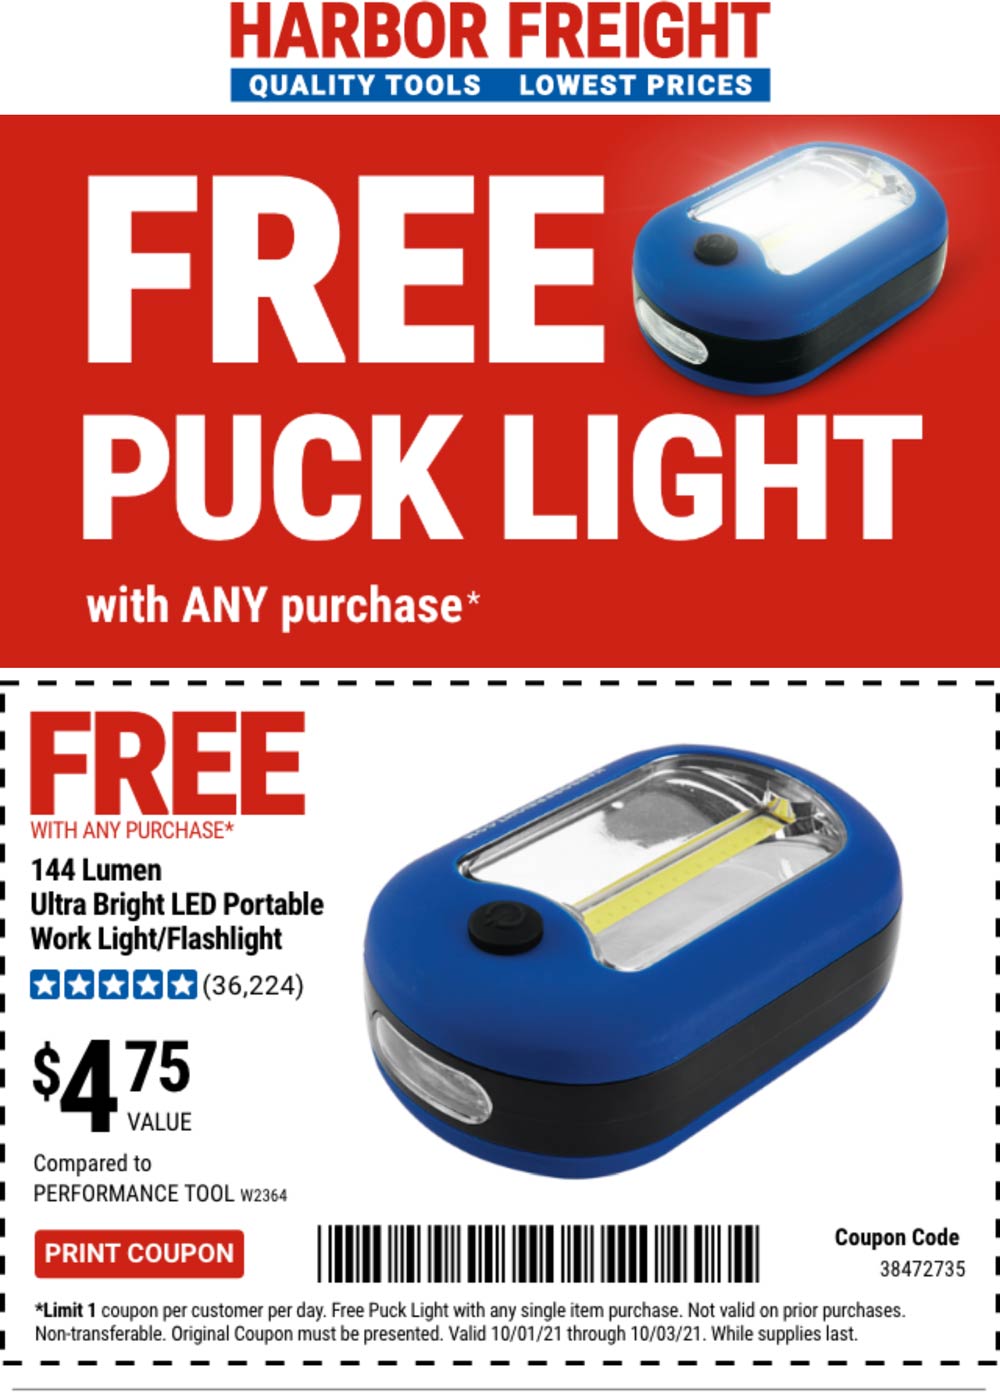 Harbor Freight stores Coupon  Free puck light with any purchase today at Harbor Freight Tools #harborfreight 